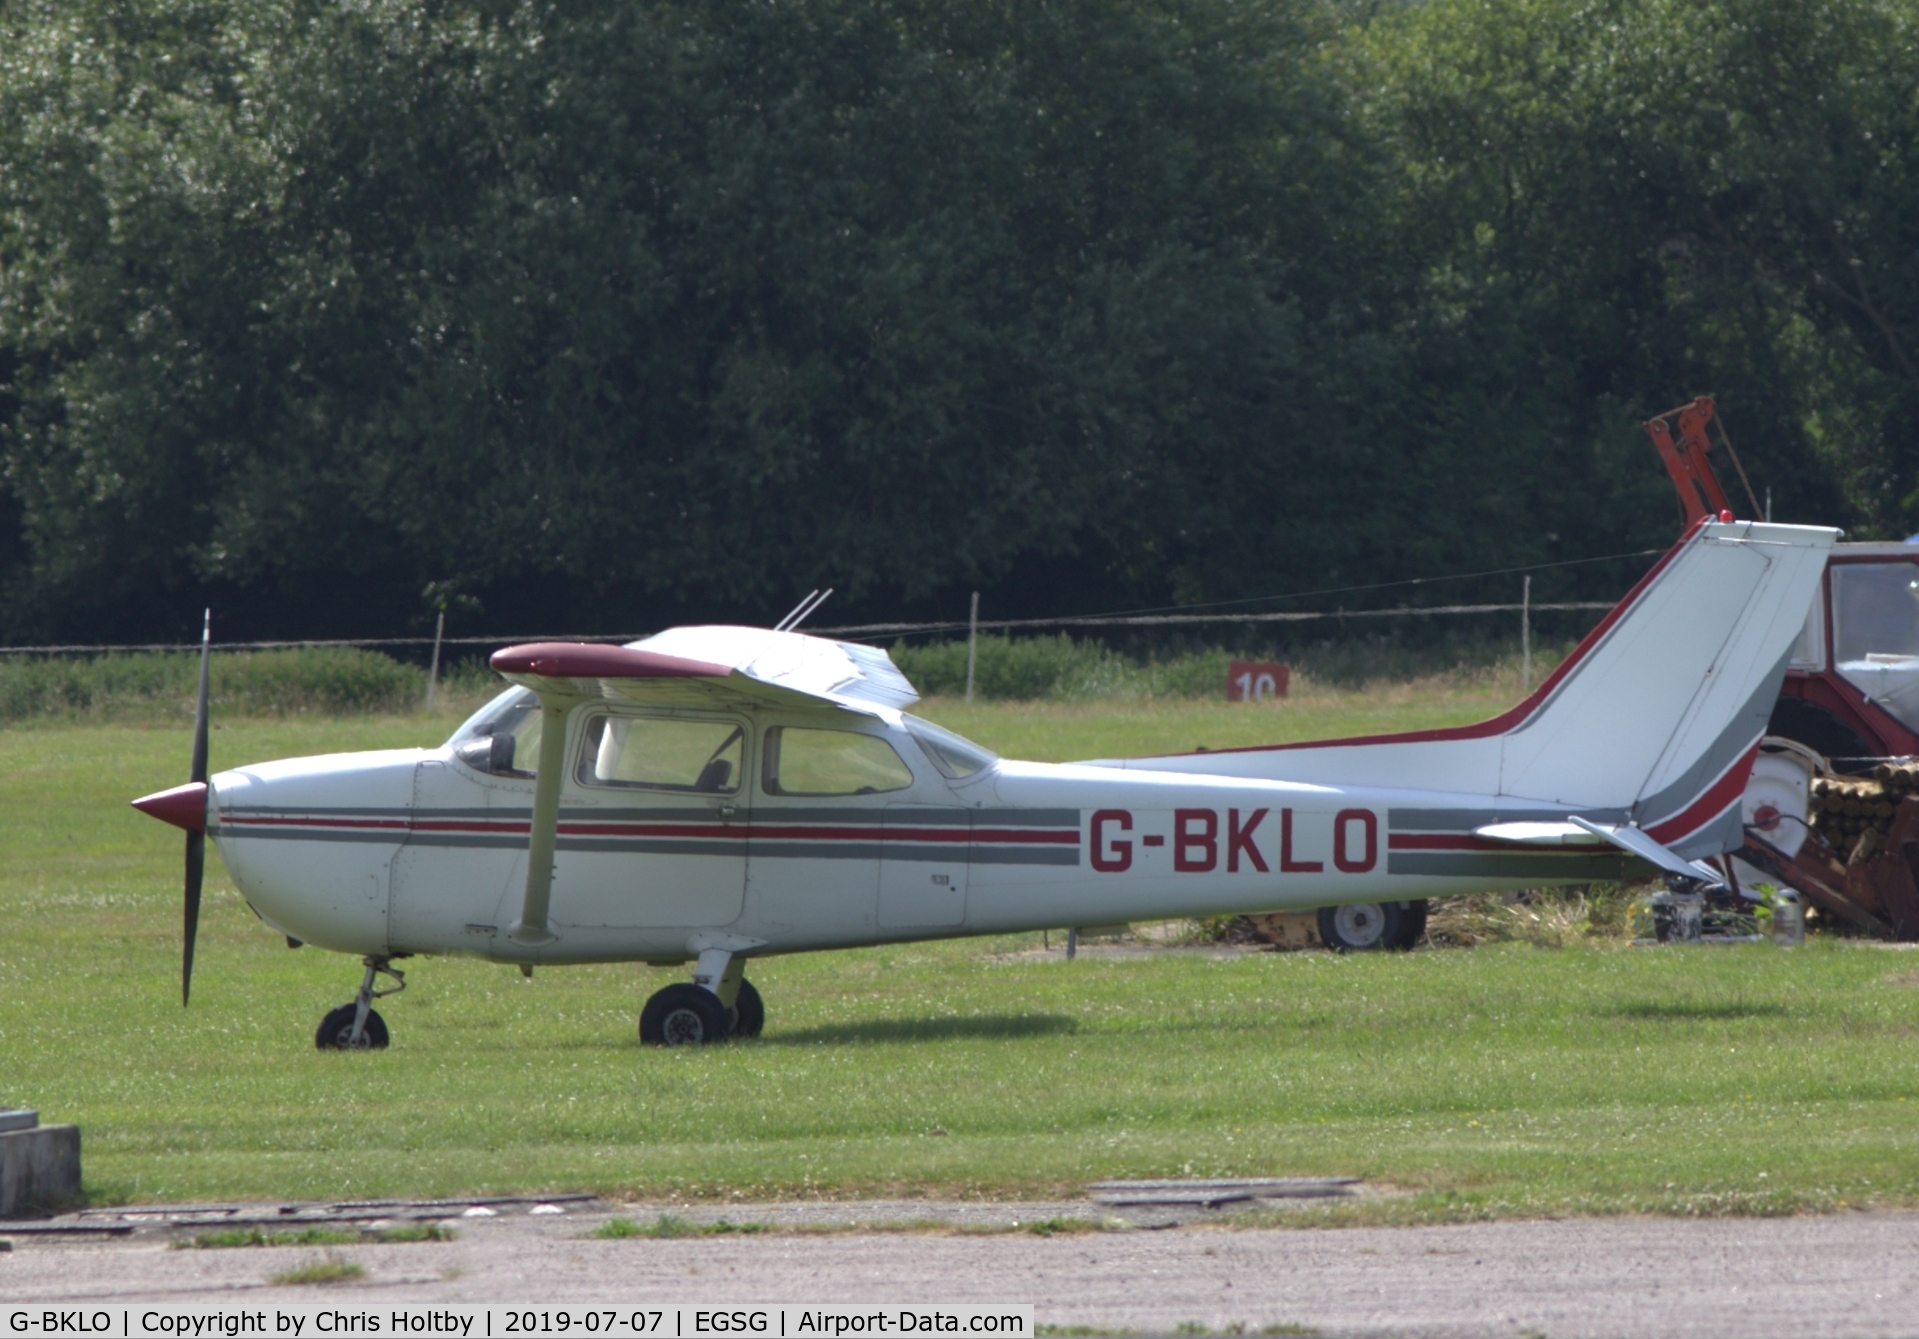 G-BKLO, 1975 Reims F172M ll Skyhawk C/N 1380, Parked for re-fueling at its base at Stapleford Tawney